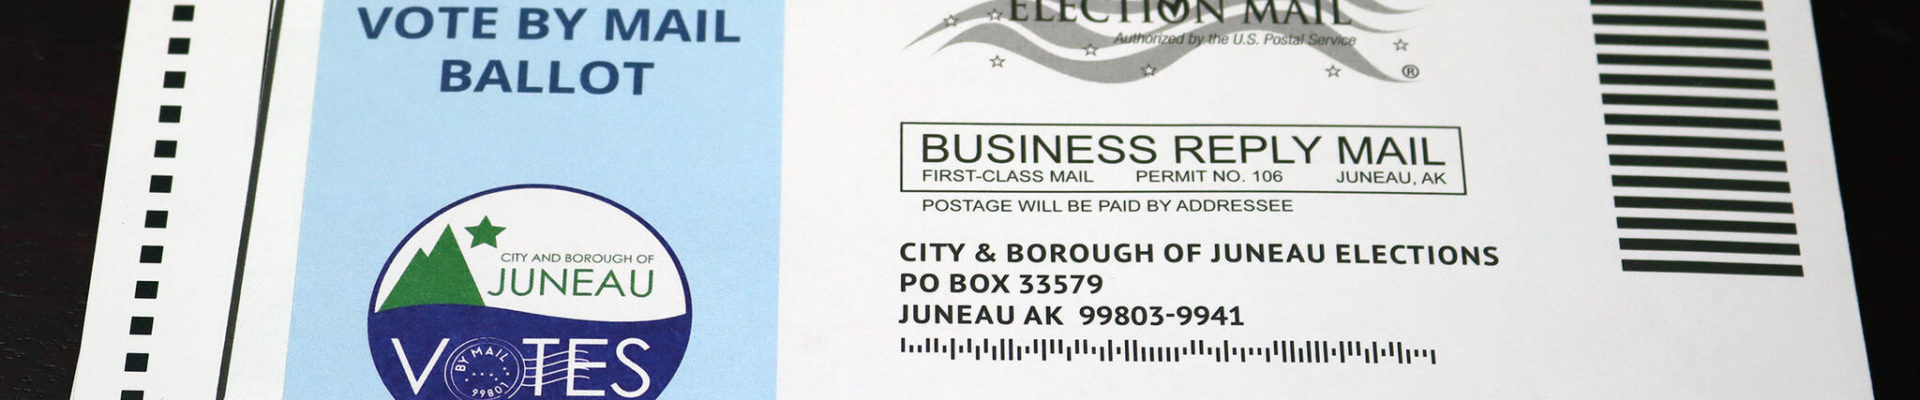 A ballot for the 2021 municipal election. On Wednesday, Will Muldoon entered the race for a seat on the Juneau Board of Public Education. He’s joining the field of candidates as a write-in option, eight days after city officials mailed ballots to voters and 13 days before ballots are due back. (Ben Hohenstatt/Juneau Empire)